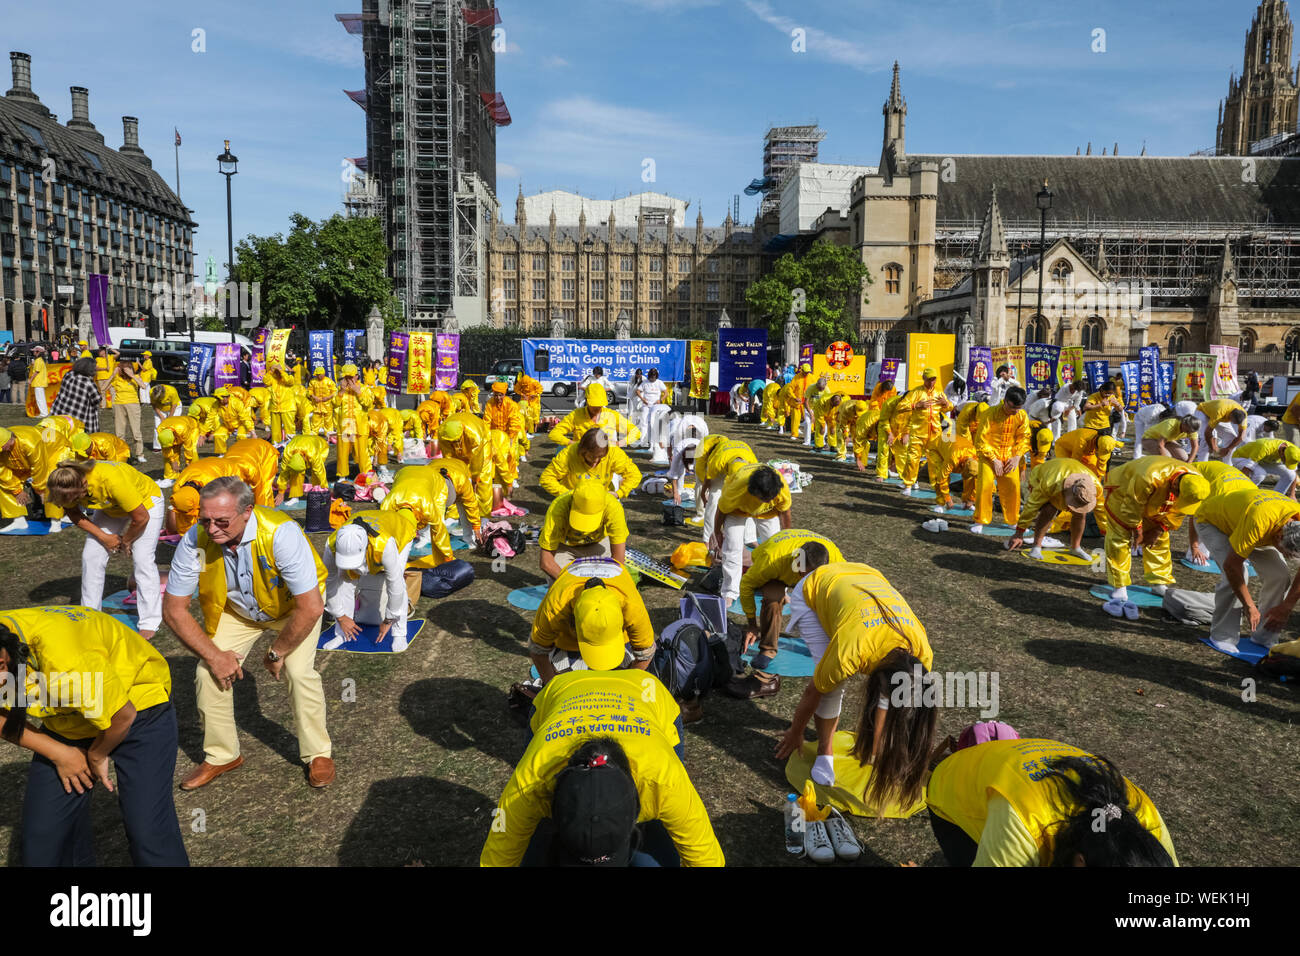 London, UK. 30th Aug 2019. Practitioners of the Chinese Falun Gong (also  known as Falun Dafa)